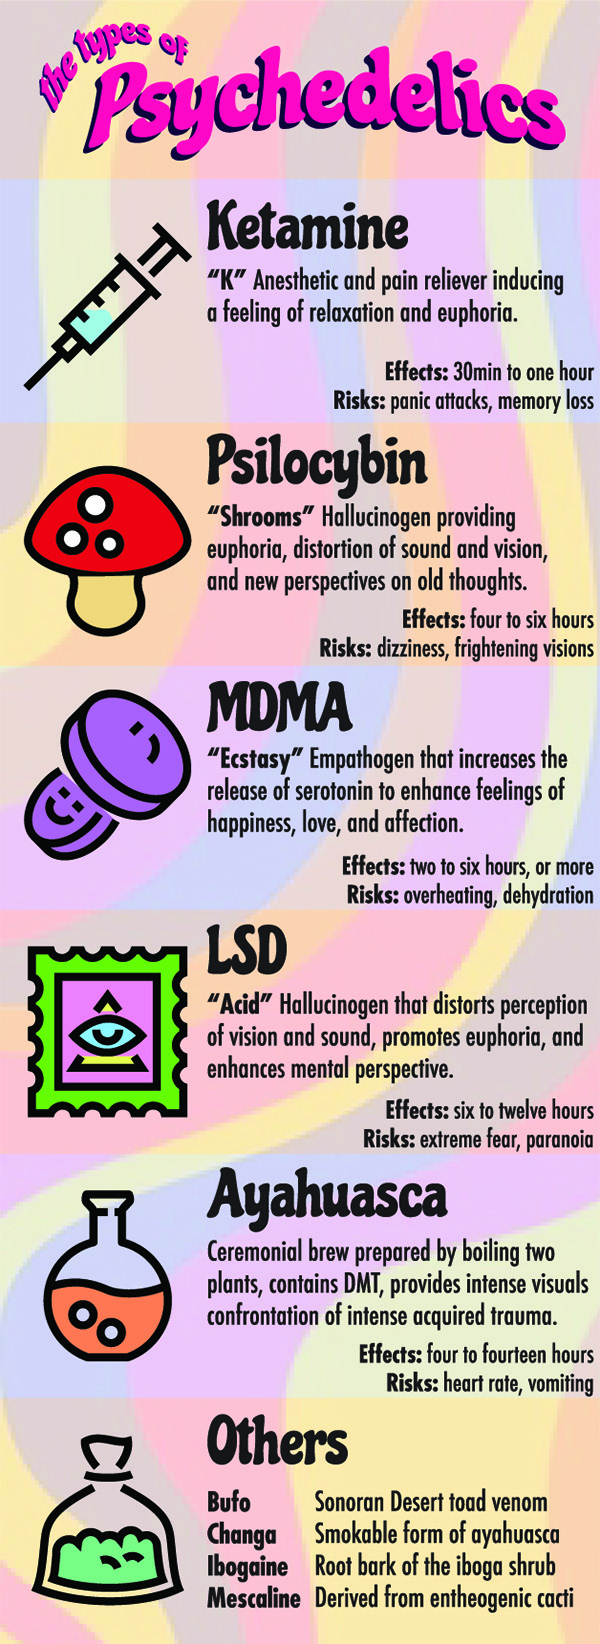 This is a graphic with information about the types of psychedelics. Ketamine: K, Anesthetic and pain reliever inducing a feeling of relaxation and euphoria. Effects: 30 min to one hour. Risks: Panic attacks, memory loss. Psilocybin: Shrooms, Hallucinogen proividing euophoria, distortion of sound and vision, and new perspectives on old thoughts. Effects: four to six hours. Risks: dizziness, frightening visions. MDMA: Ecstasy, empathogen that increases the release of serotonin to enhance feelings of happiness, love, and affection. Effects: two to six hours, or more. Risks: overheating, dehydration. LSD: Acid, Hallucinogen that distorts perception of vision and sound, promotes euphoria, and enhances mental perspective. Effects: six to twelve hours, Risks: extreme fear, paranoia. Ayahuasca: Ceremonial brew prepared by boiling two plants, contains DMT, provides intense visuals, confrontation of intense acquired trauma. Effects: four to fourteen hours. Risks: heart rate, vomiting. Other types: Bufo, Changa, Ibogaine, Mescaline.